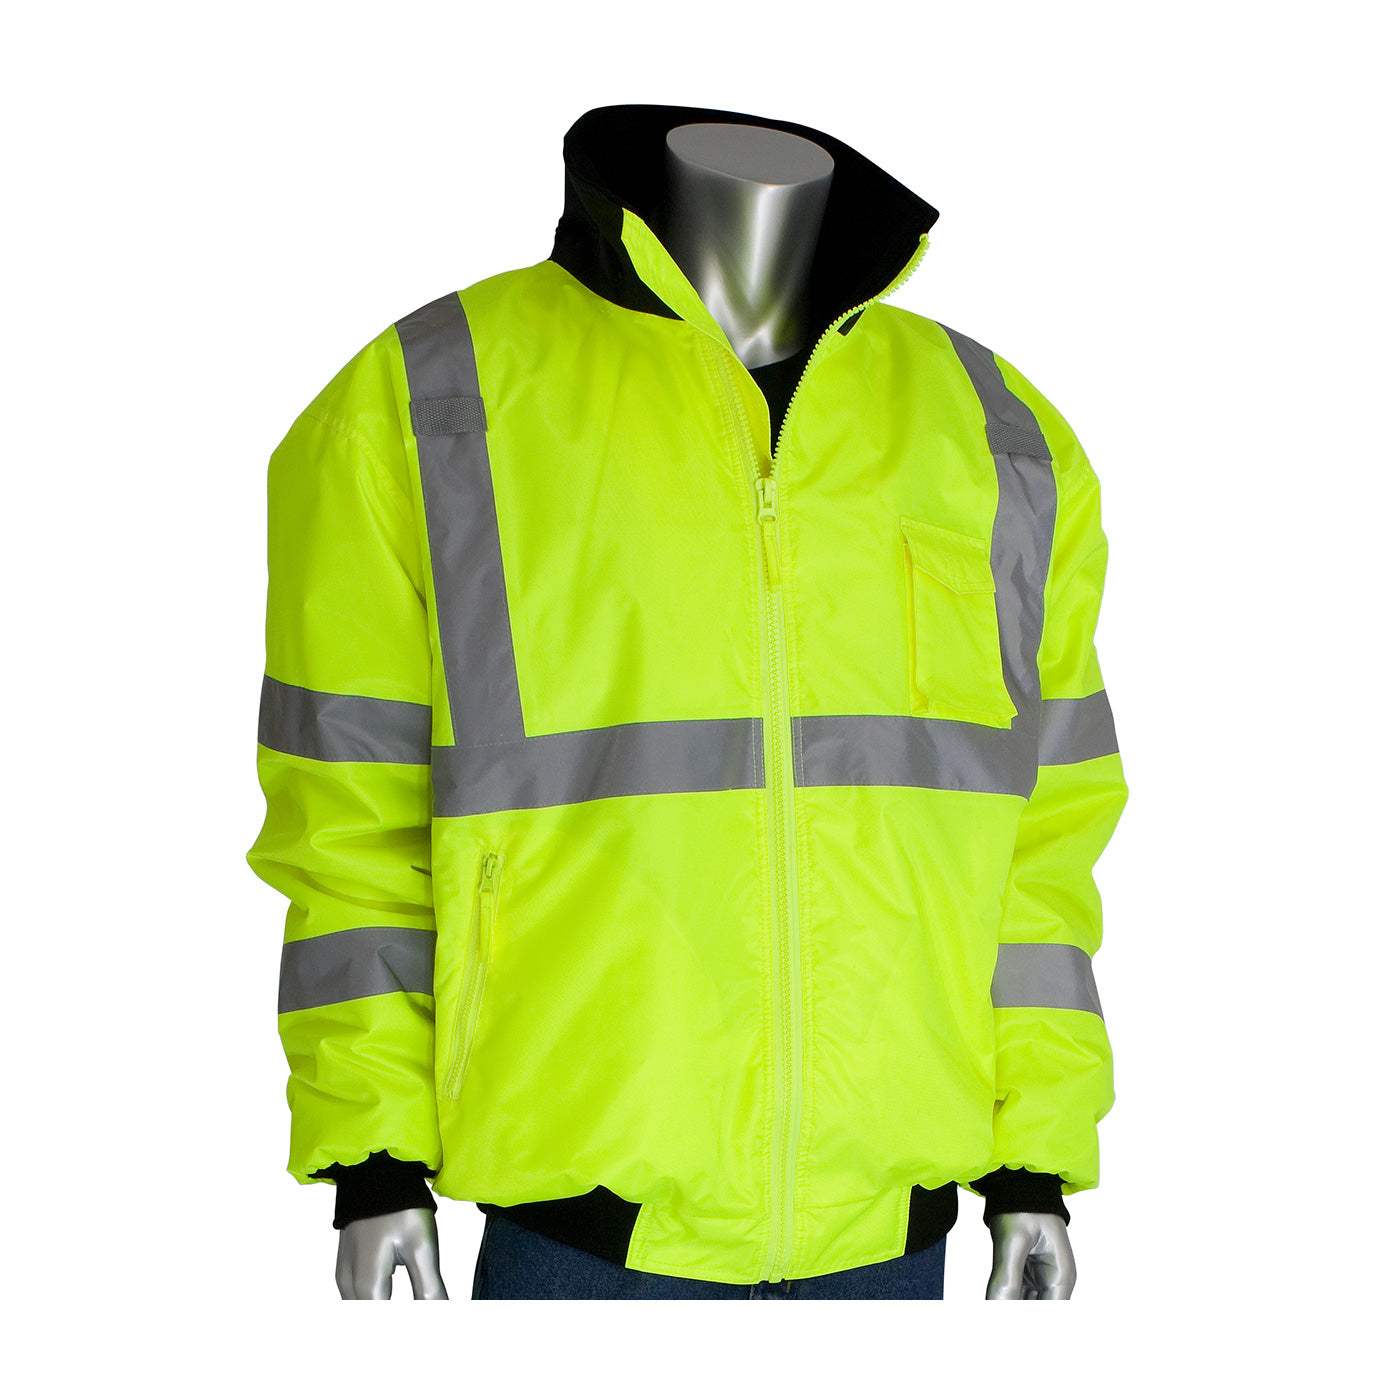 PIP - ANSI Type R Class 3 Value Bomber Jacket with Zip-Out Fleece Liner-eSafety Supplies, Inc